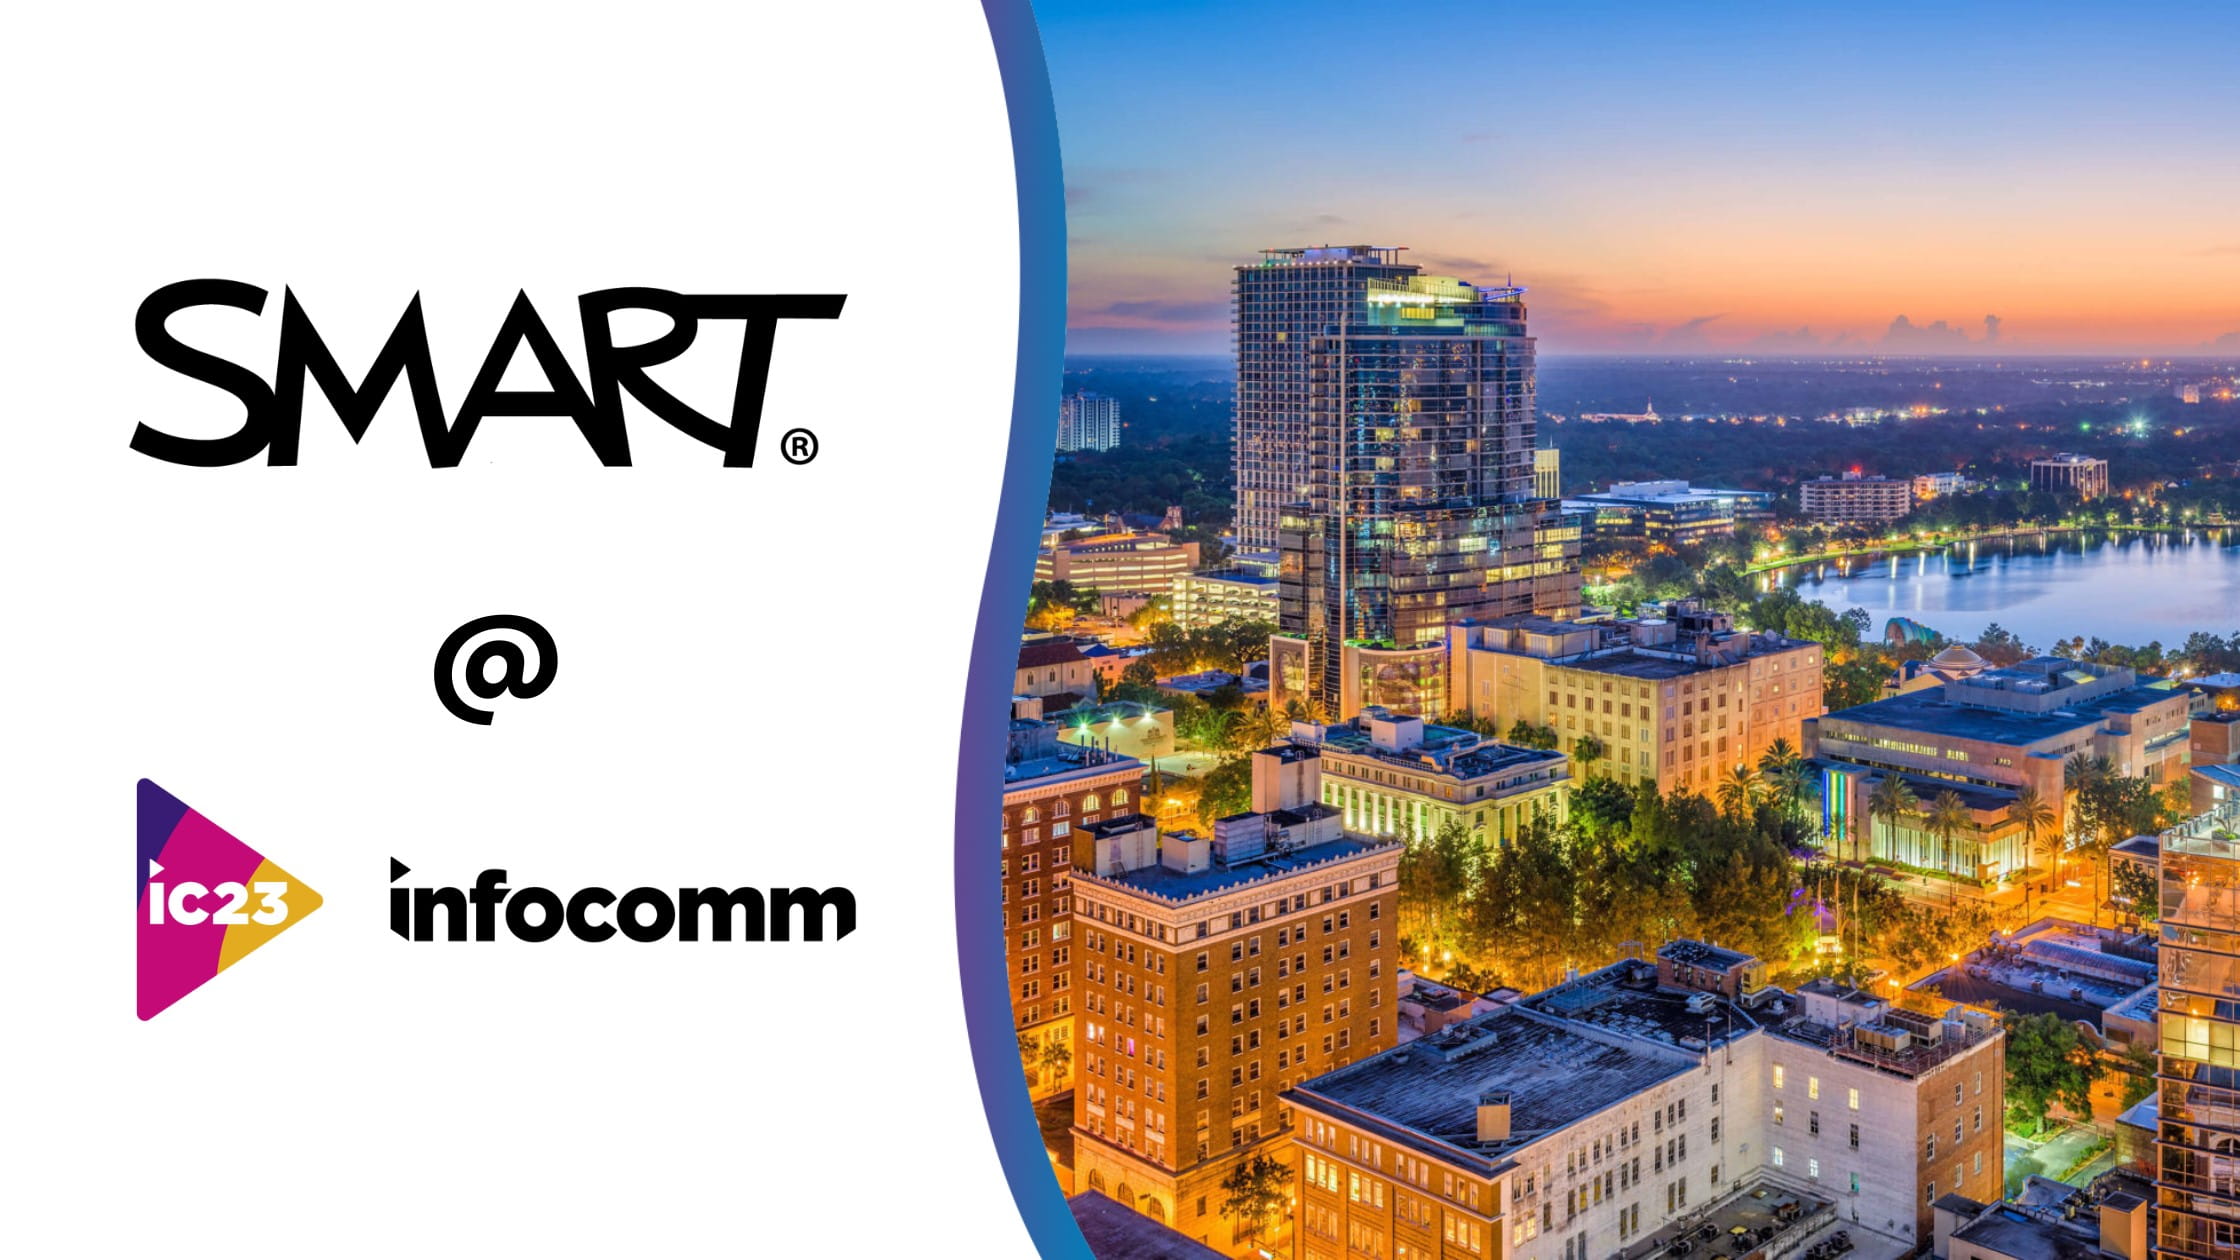 Image of the SMART business event logo with a background image beside it, featured at Infocomm 2023.